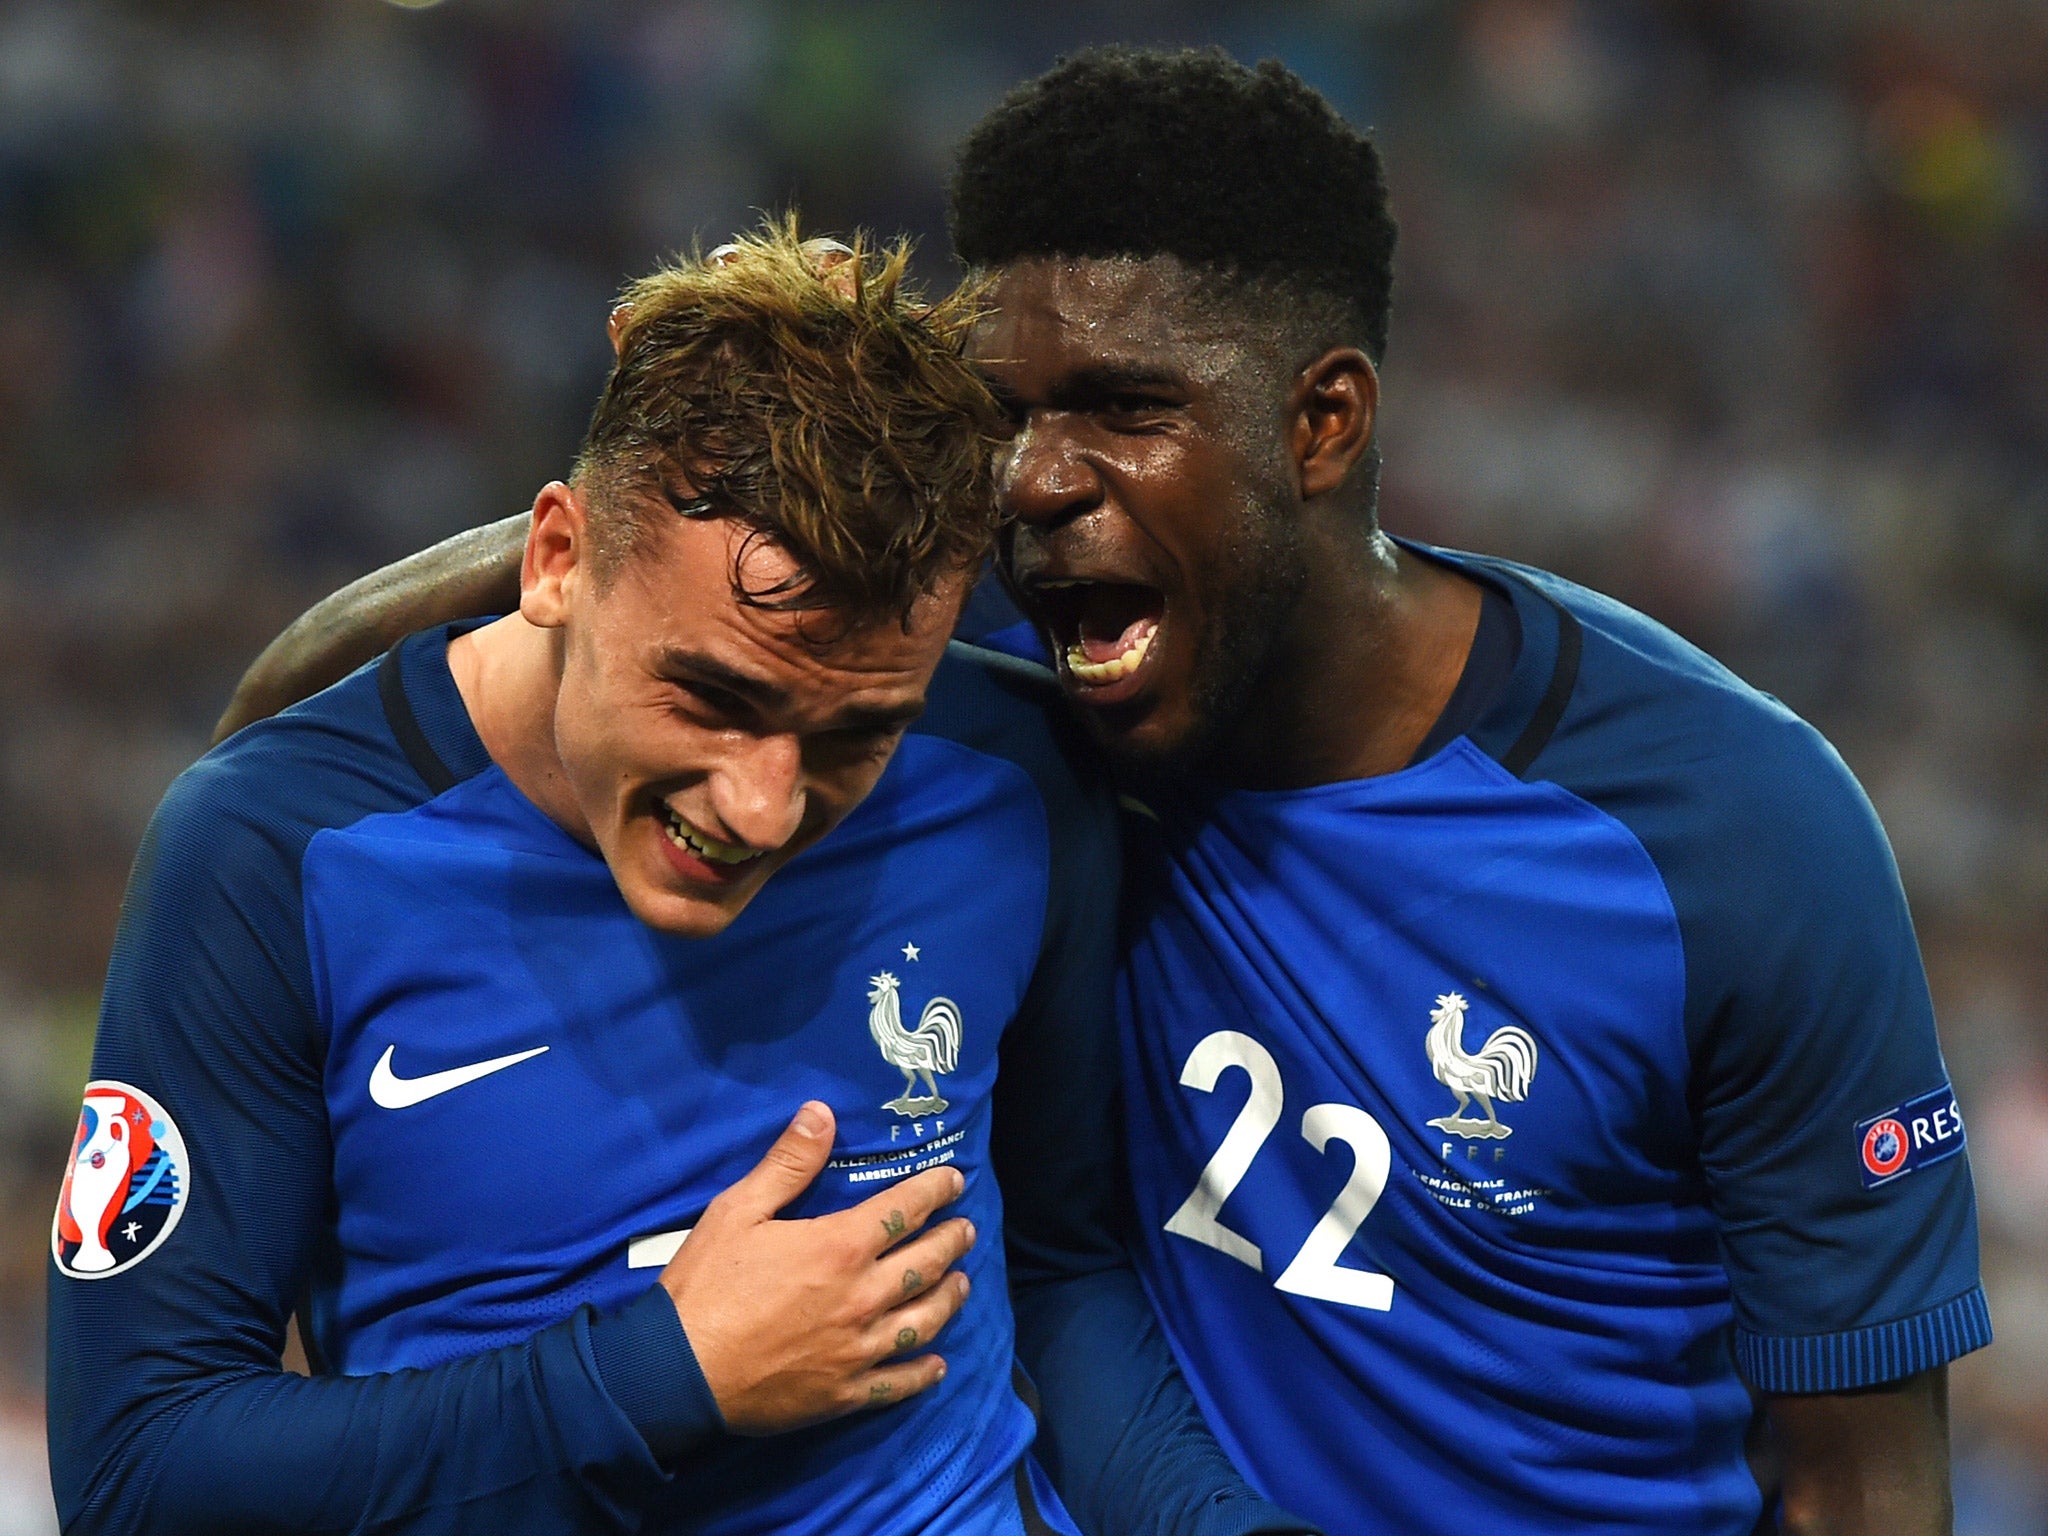 Samuel Umtiti (right) celebrates with Antoine Griezmann during France's 2-0 win over Germany